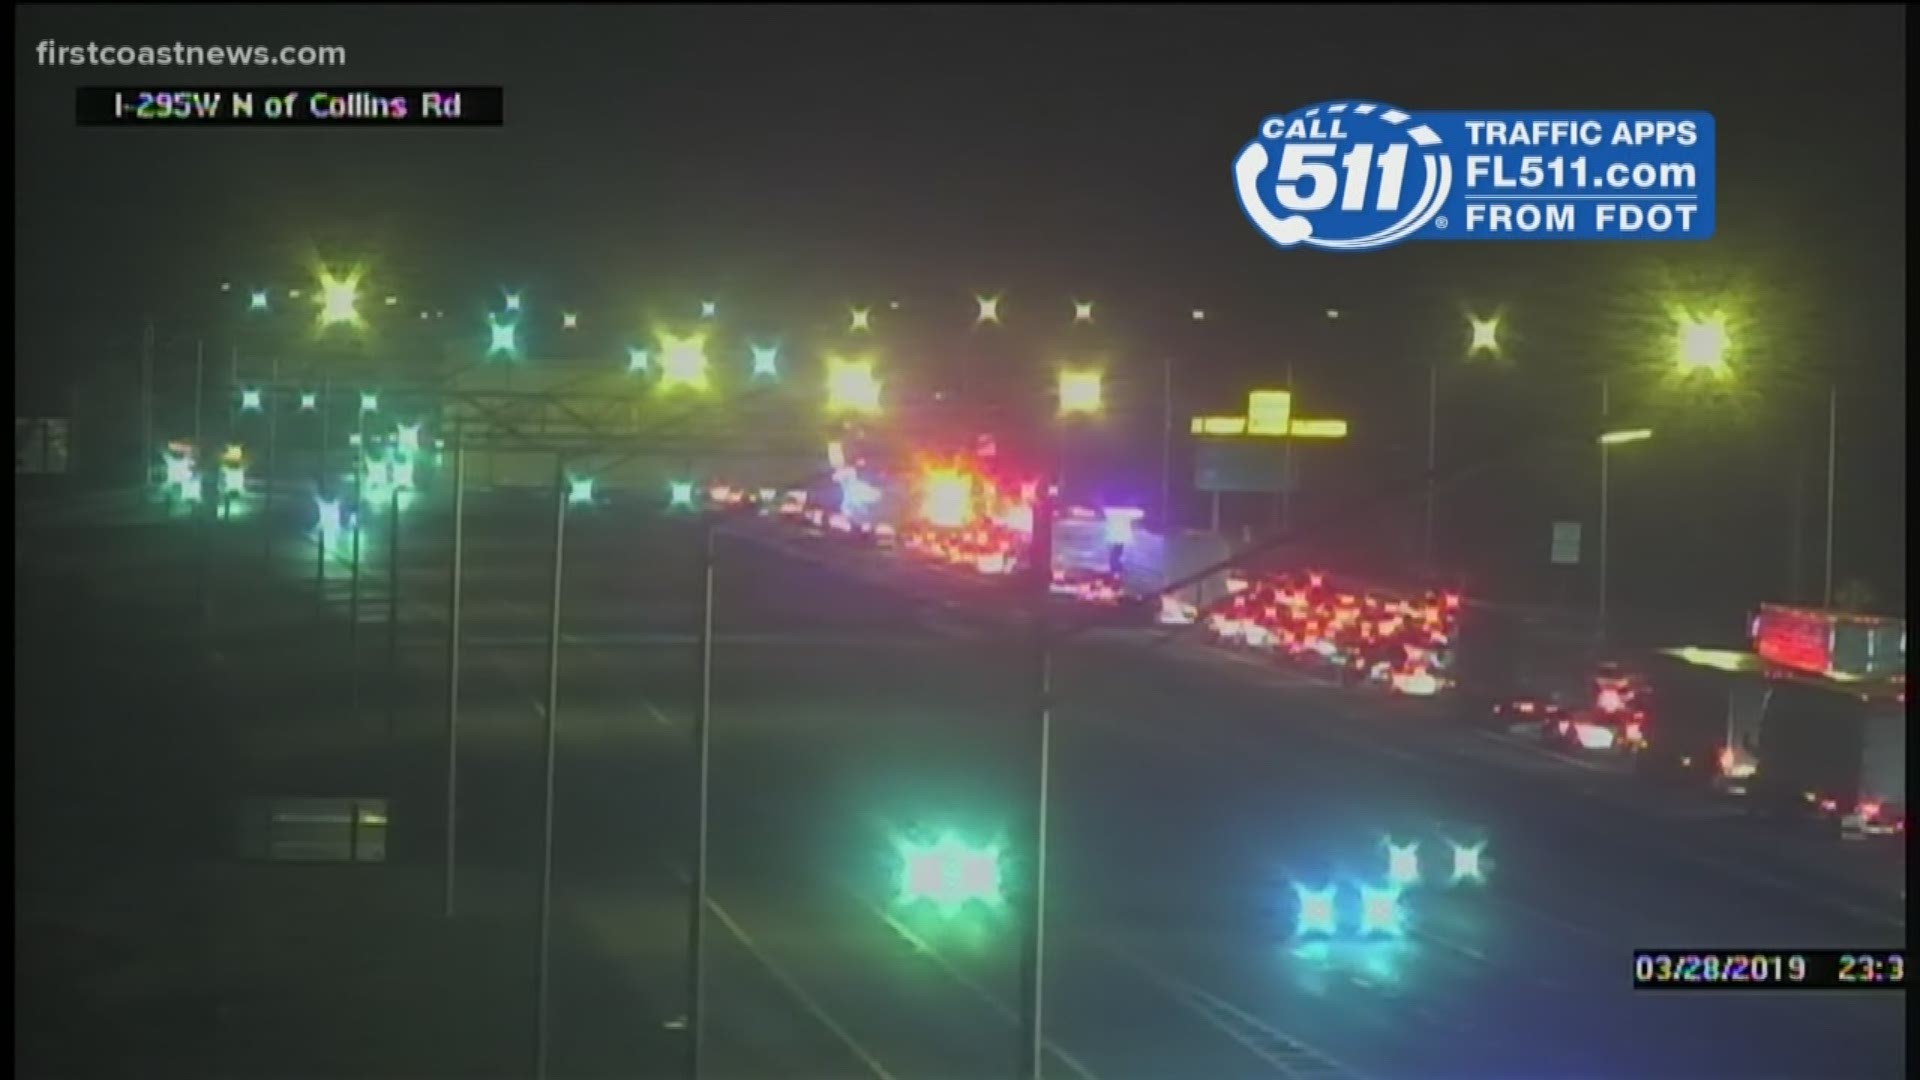 Northbound lanes of I-295 were blocked Thursday night for investigation.